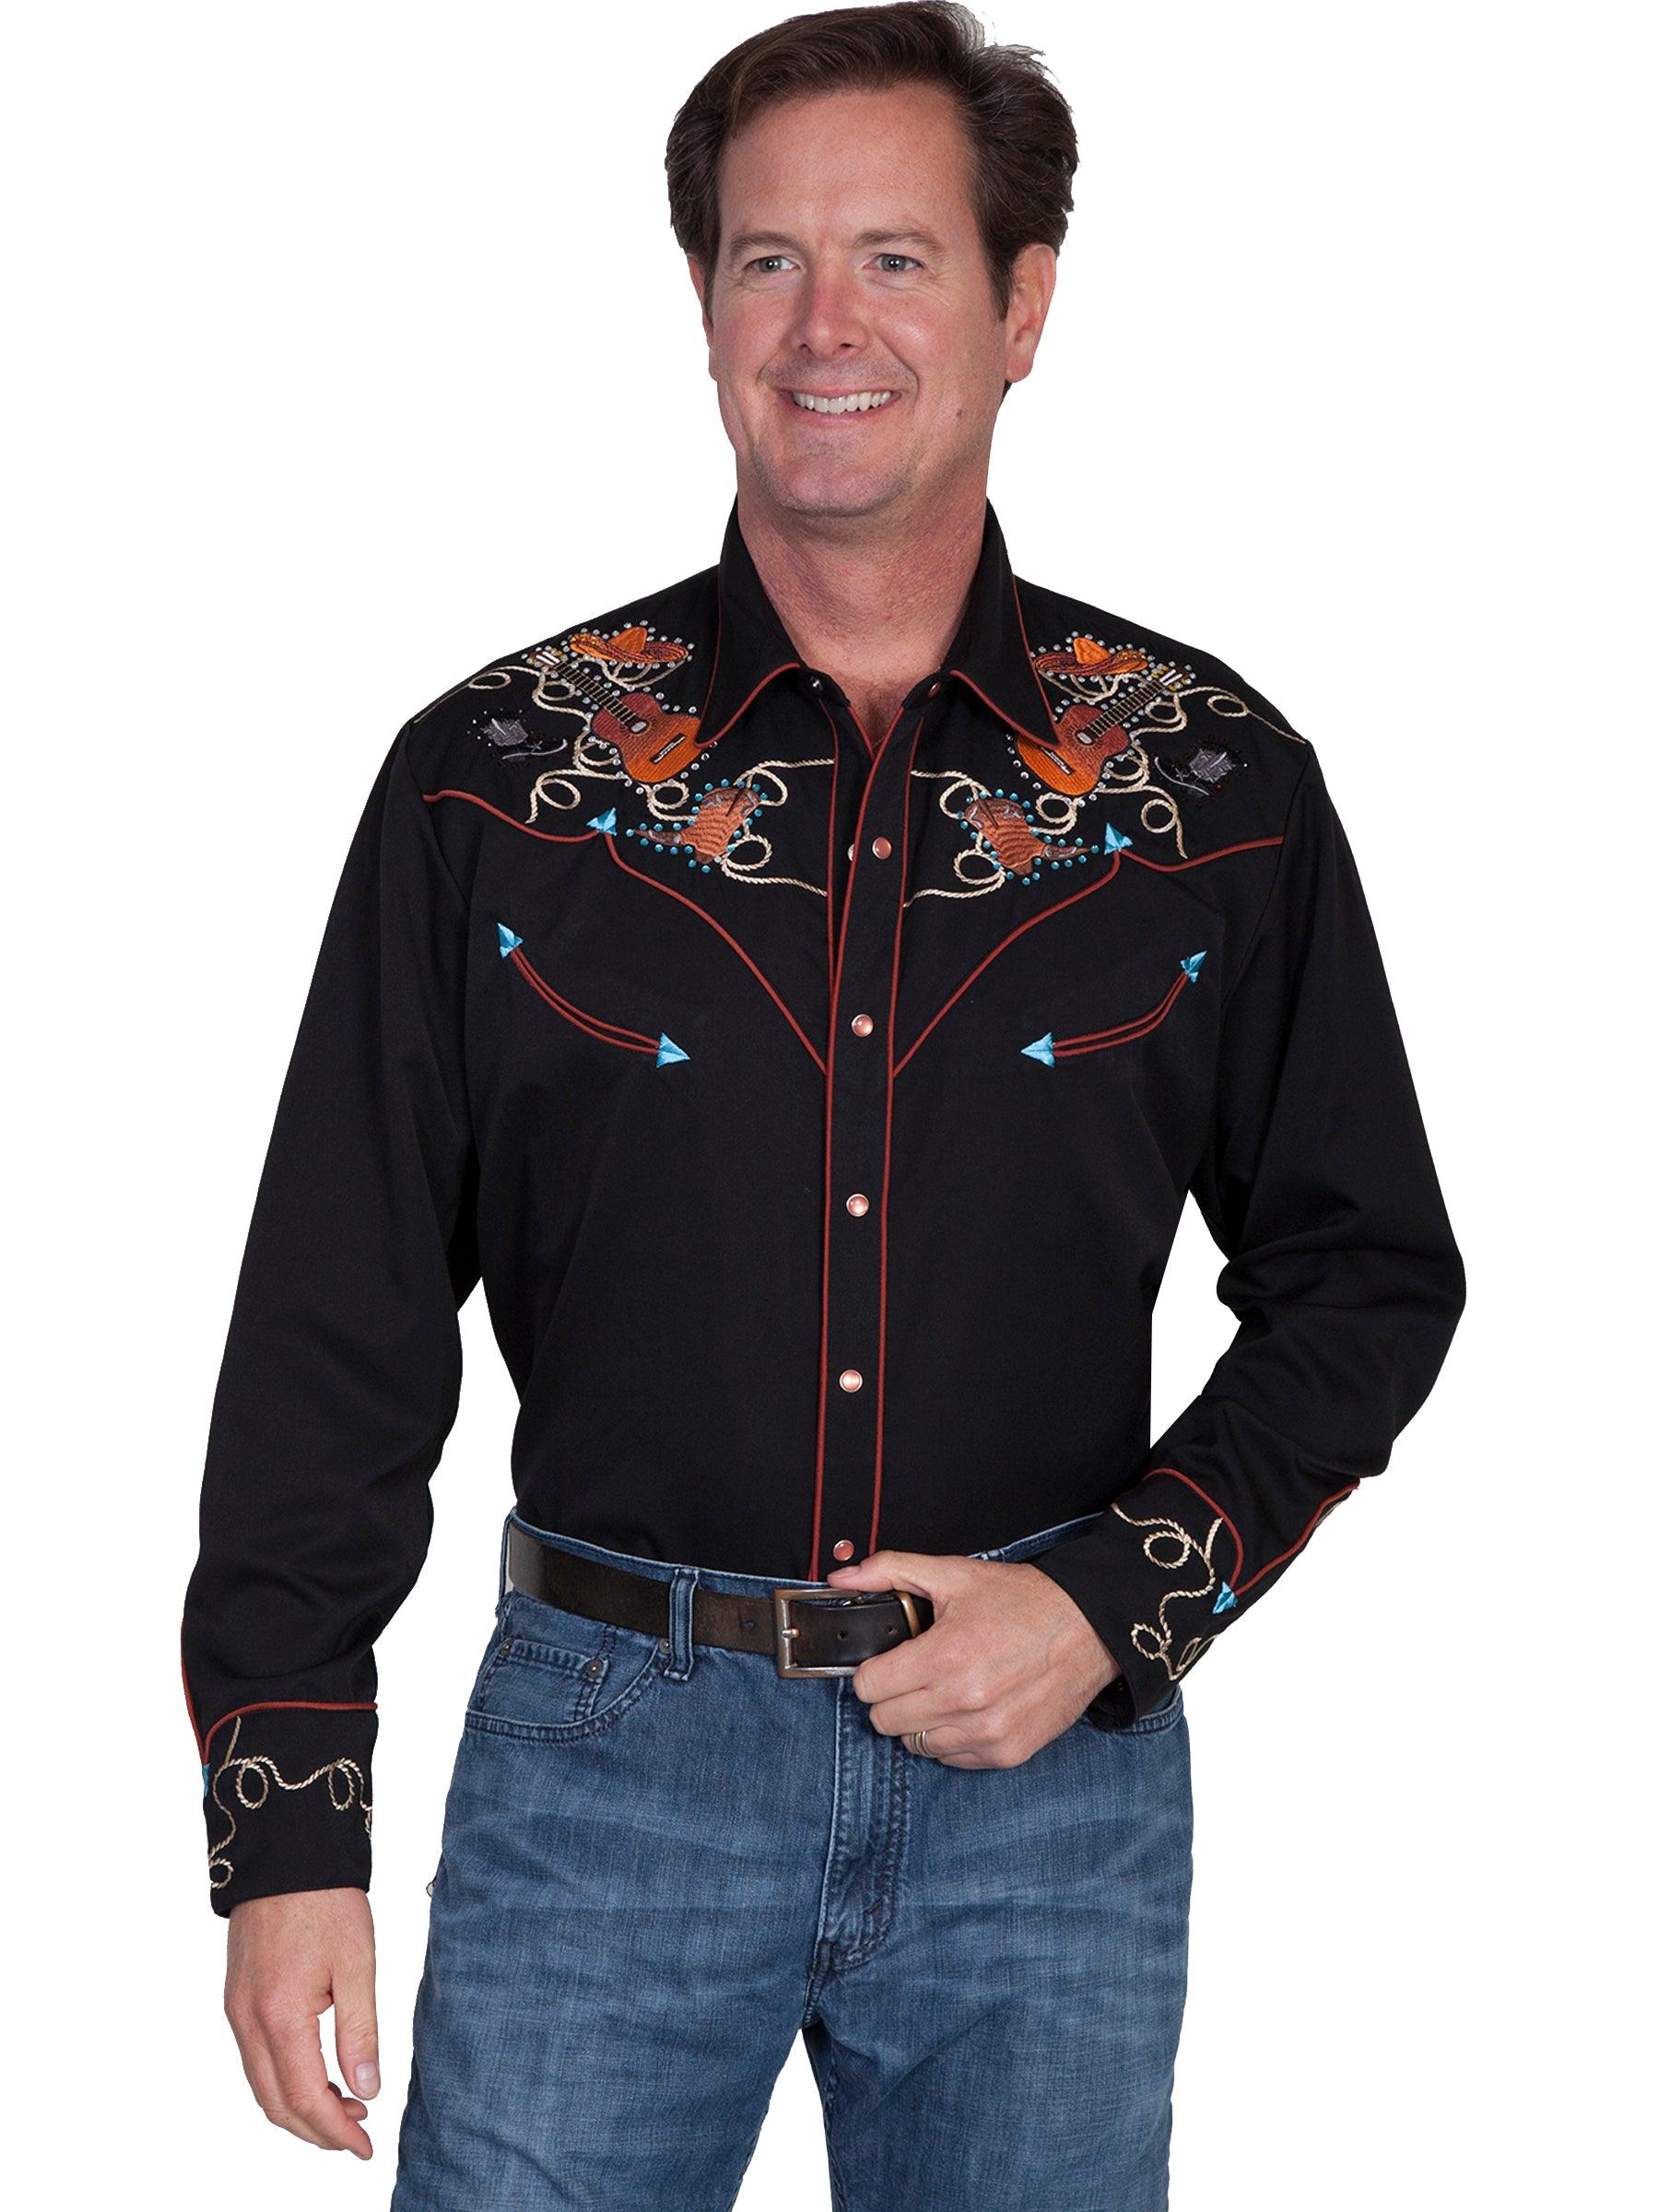 Scully BLACK BOOTS HATS GUITARS EMBROIDERED SHIRT - Flyclothing LLC